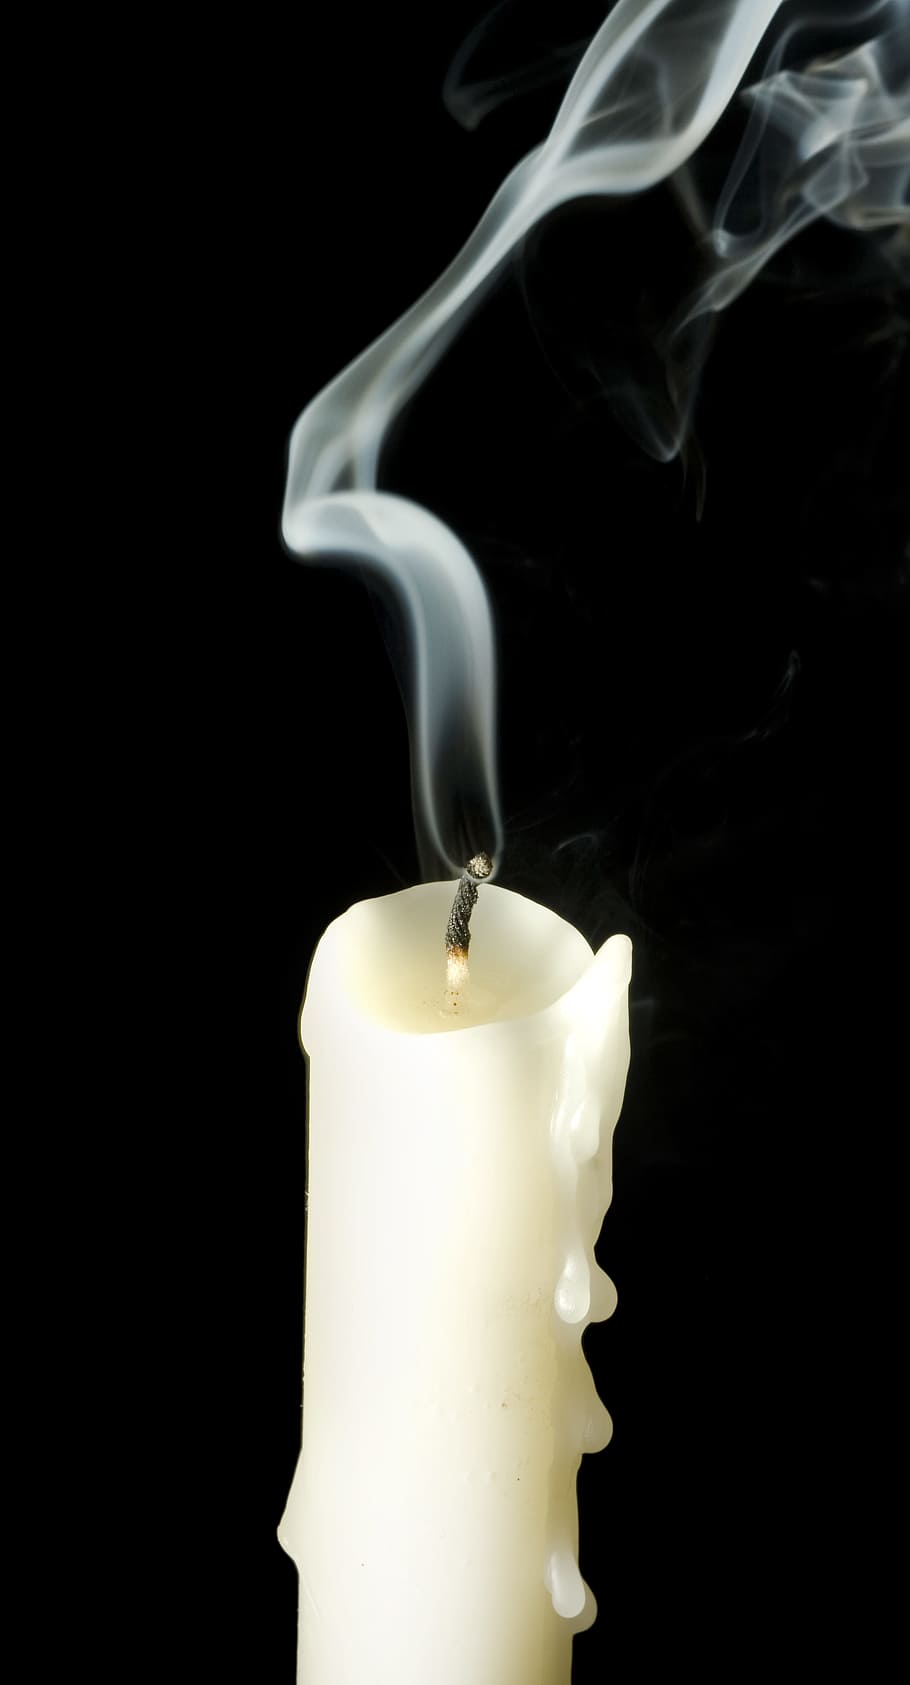 100 Candle Pictures  Download Free Images  Stock Photos on Unsplash